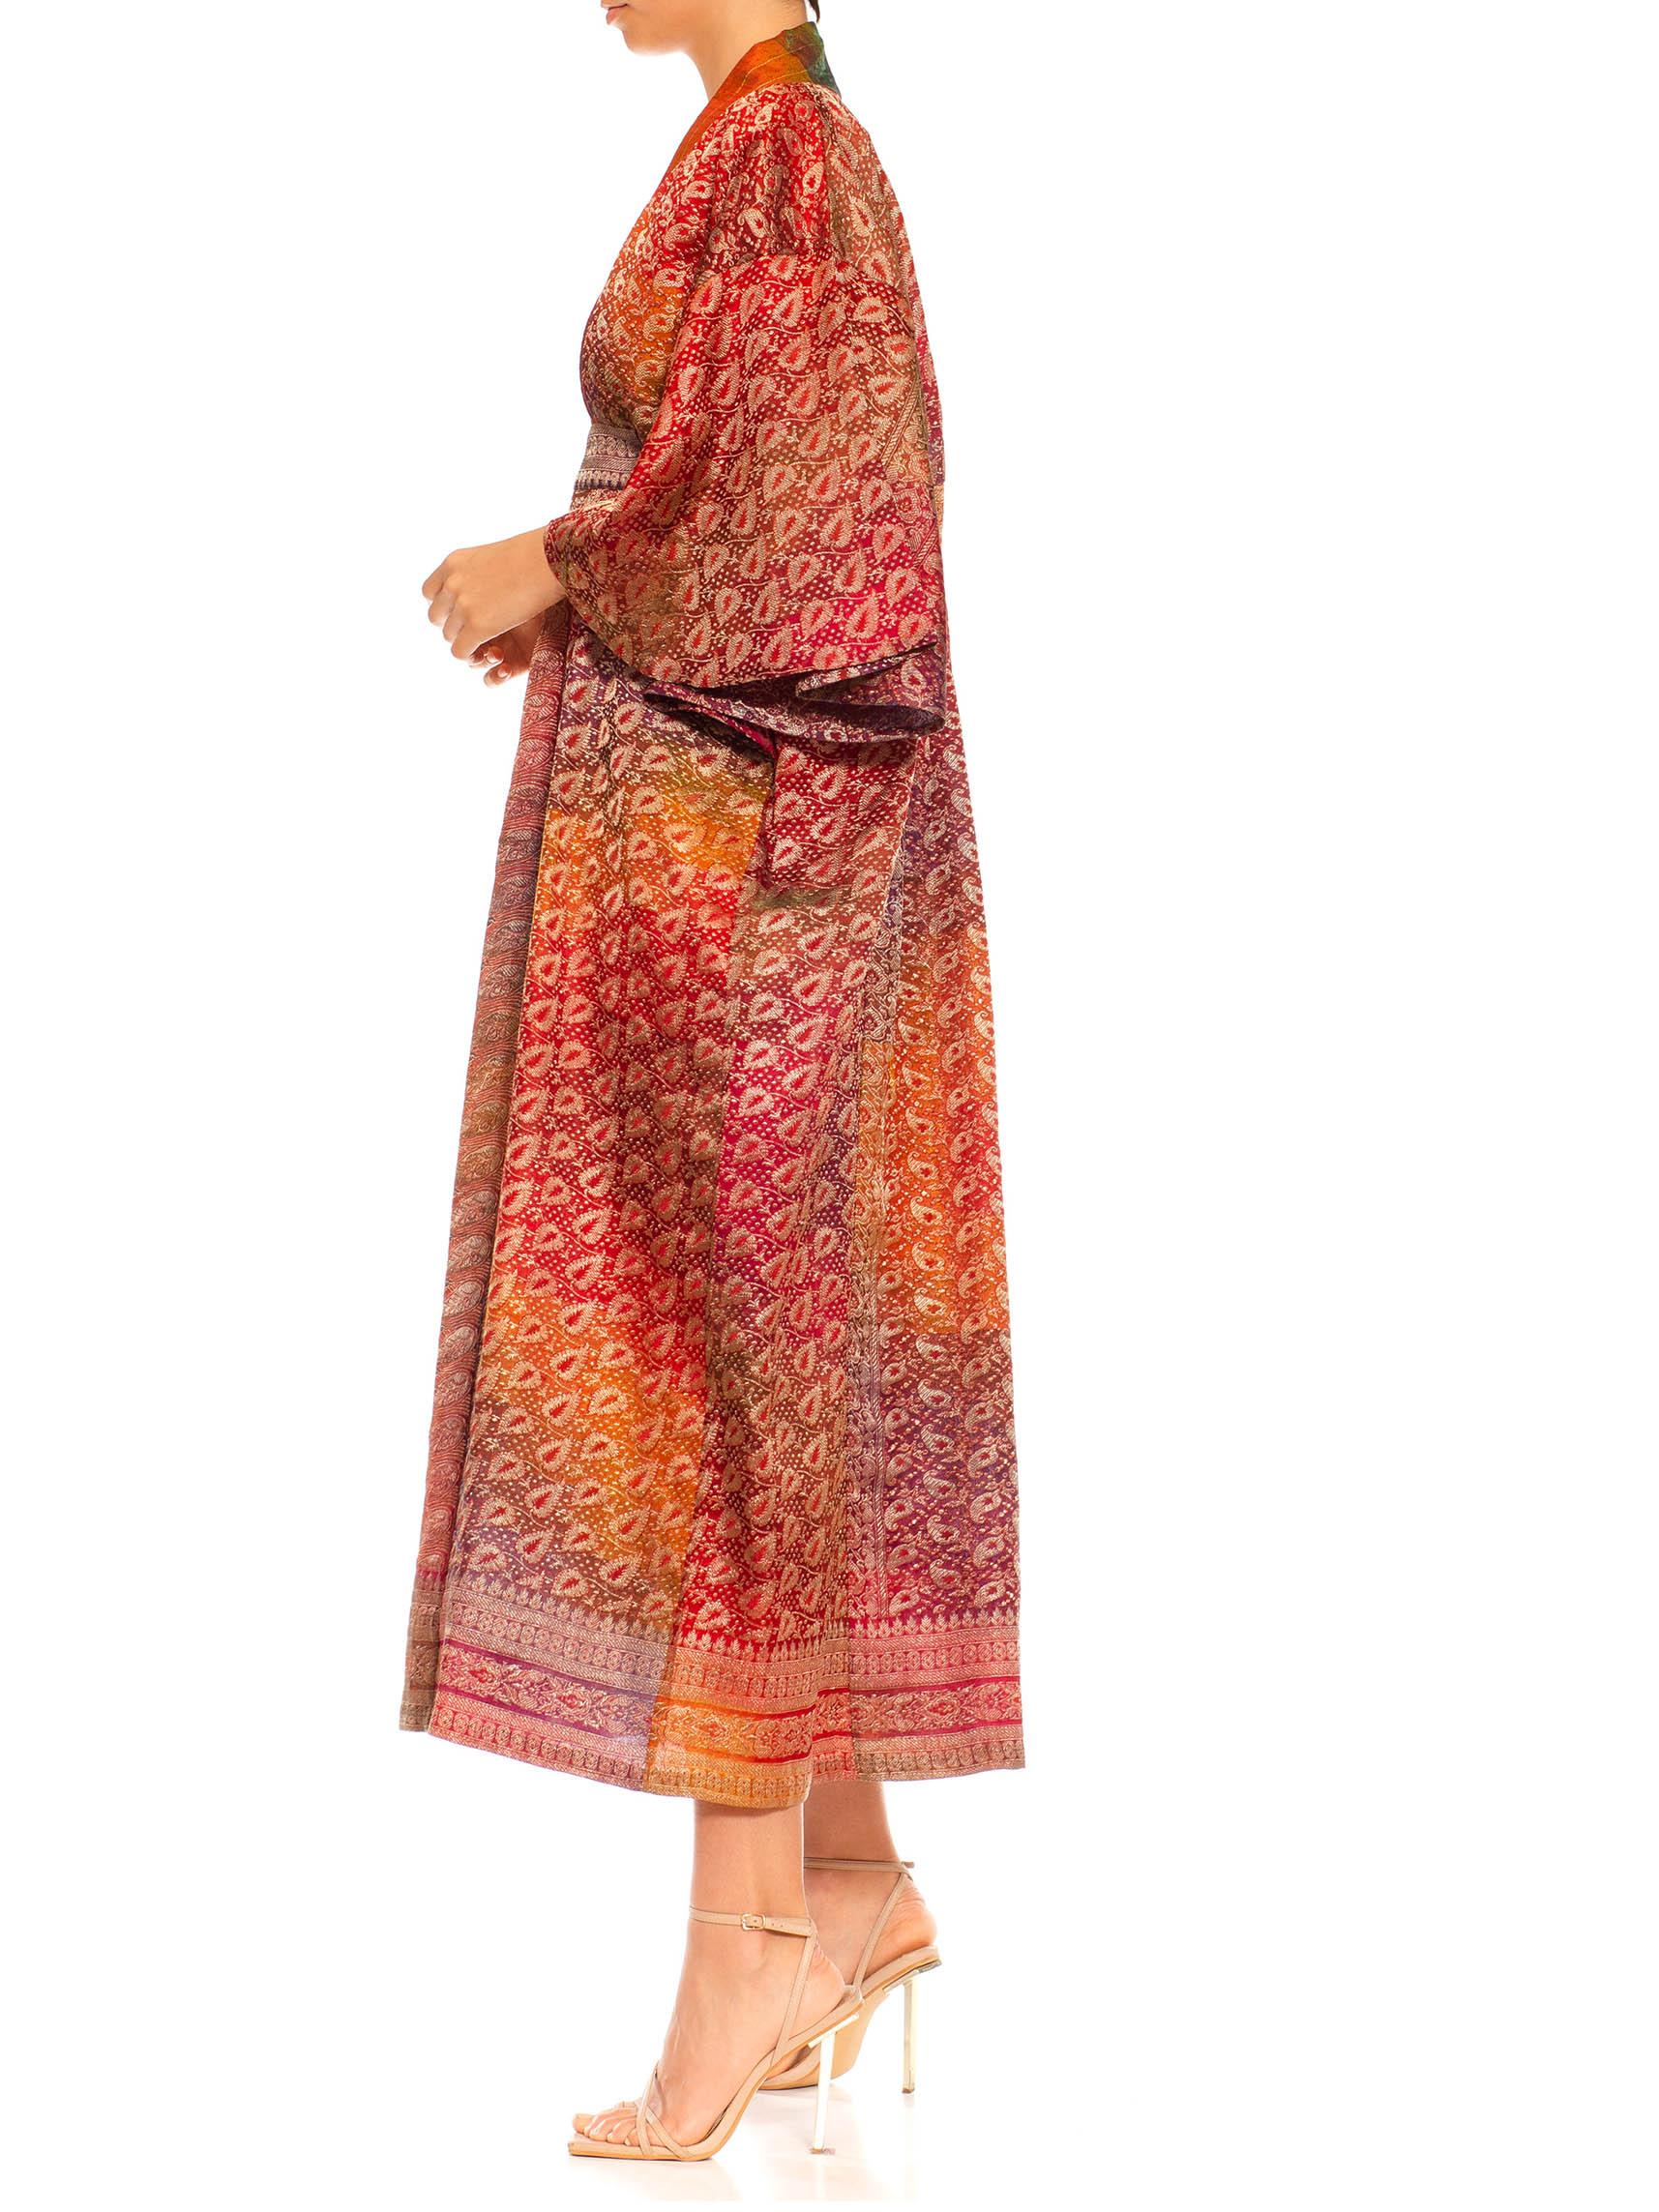 MORPHEW COLLECTION Multicolor Metallic Gold Silk Kaftan With Leaf Print Made From Vintage Saris
MORPHEW COLLECTION is made entirely by hand in our NYC Ateliér of rare antique materials sourced from around the globe. Our sustainable vintage materials